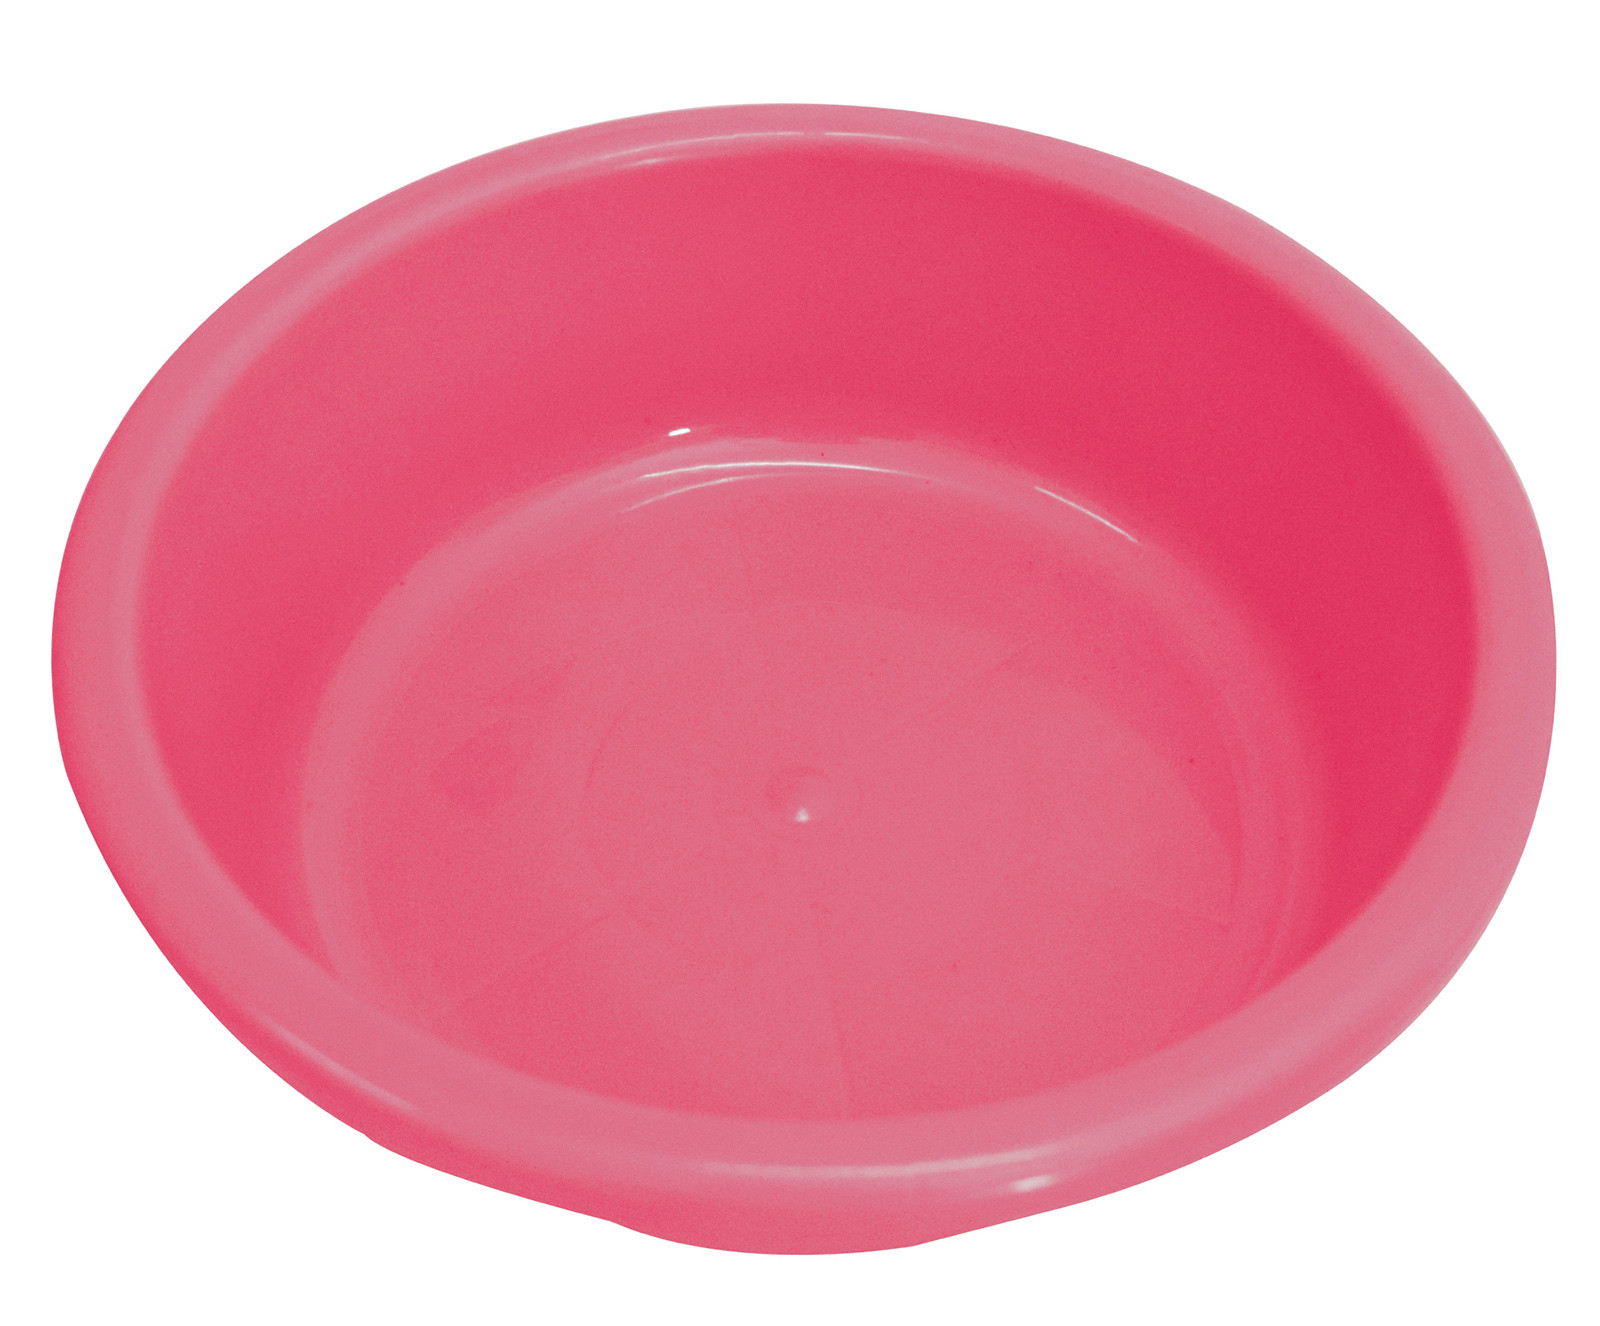 Kuber Industries Multiuses Unbreakable Plastic Knead Dough Basket/Basin Bowl For Home & Kitchen 6 Ltr- Pack of 2 (Black & Pink)